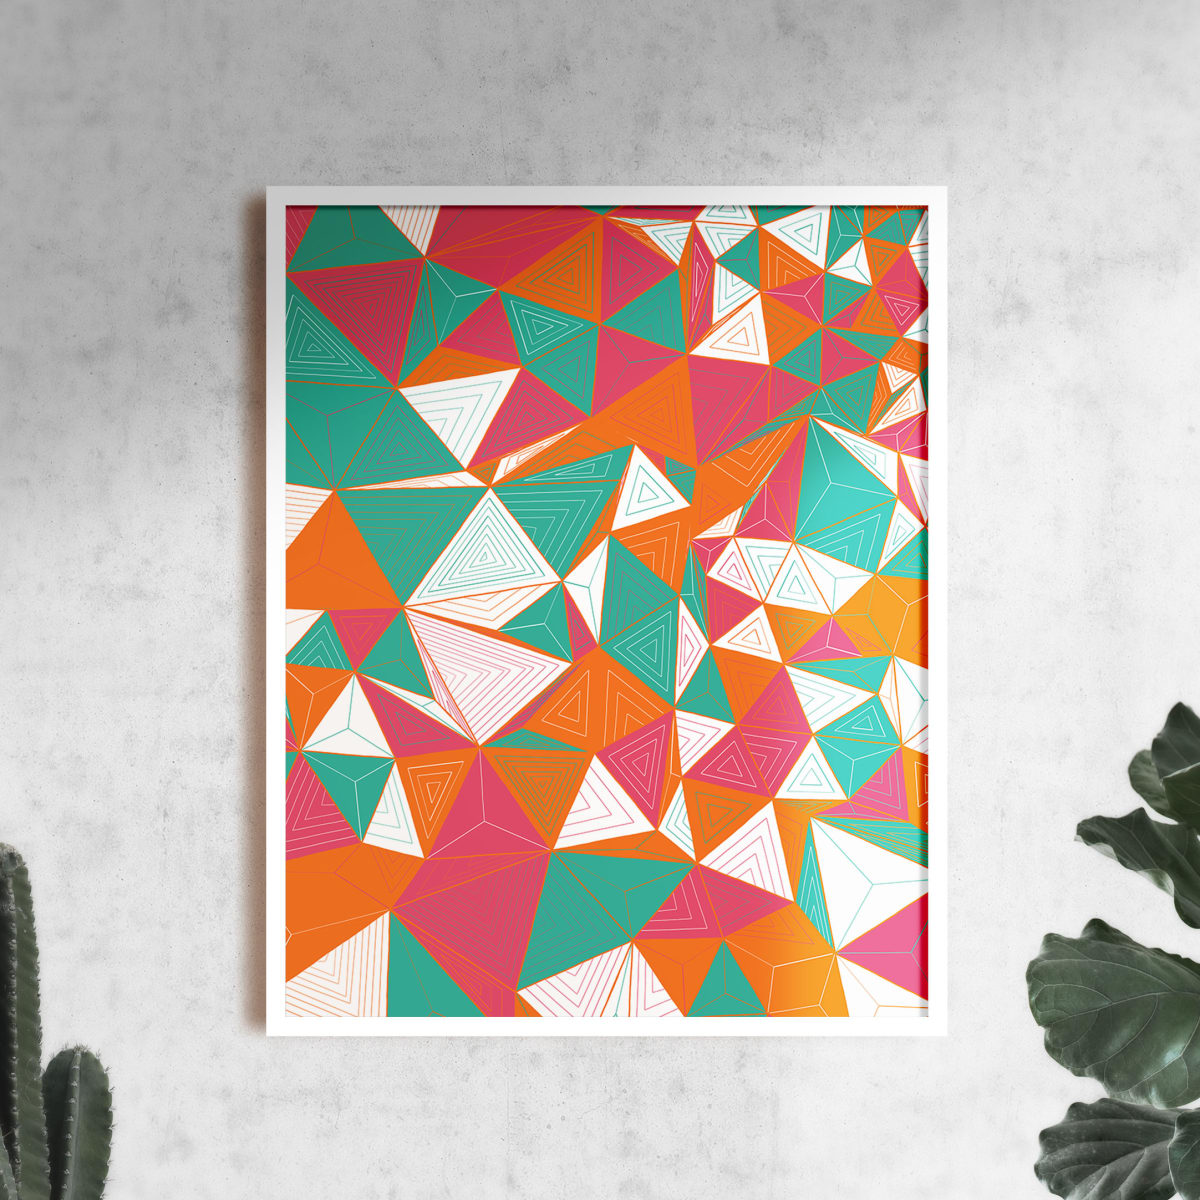 "Conscious Growth 084" Large One-of-a-Kind Print by Debbie Clapper  Image: Conscious Growth Print 084, a pink, teal, orange, and white one of a kind archival modern art print